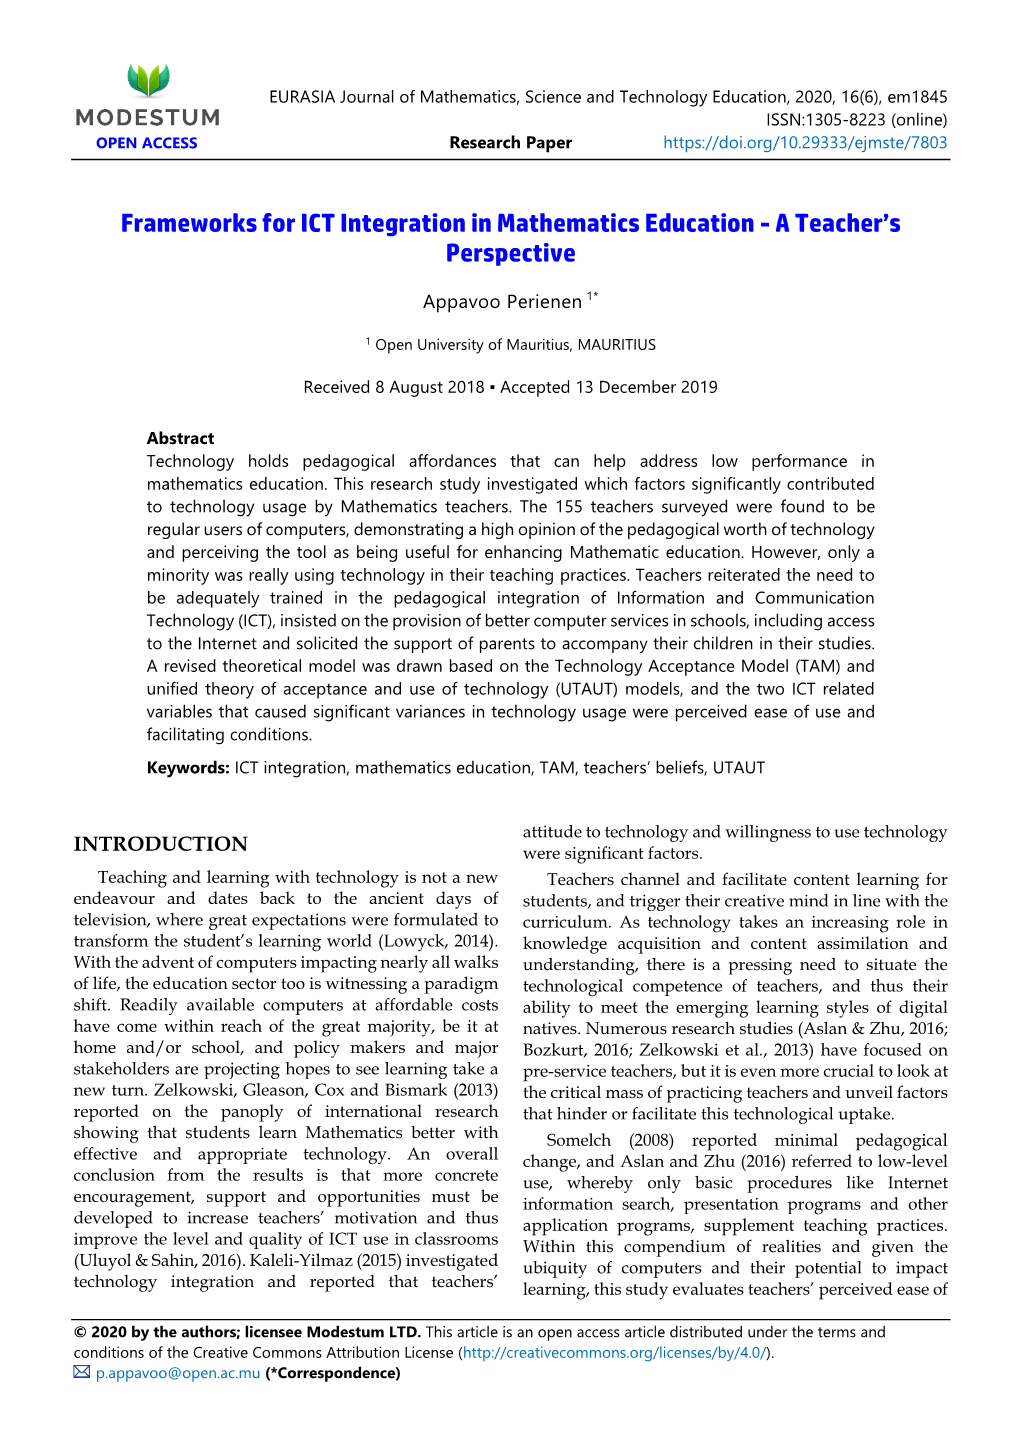 Frameworks for ICT Integration in Mathematics Education - a Teacher’S Perspective